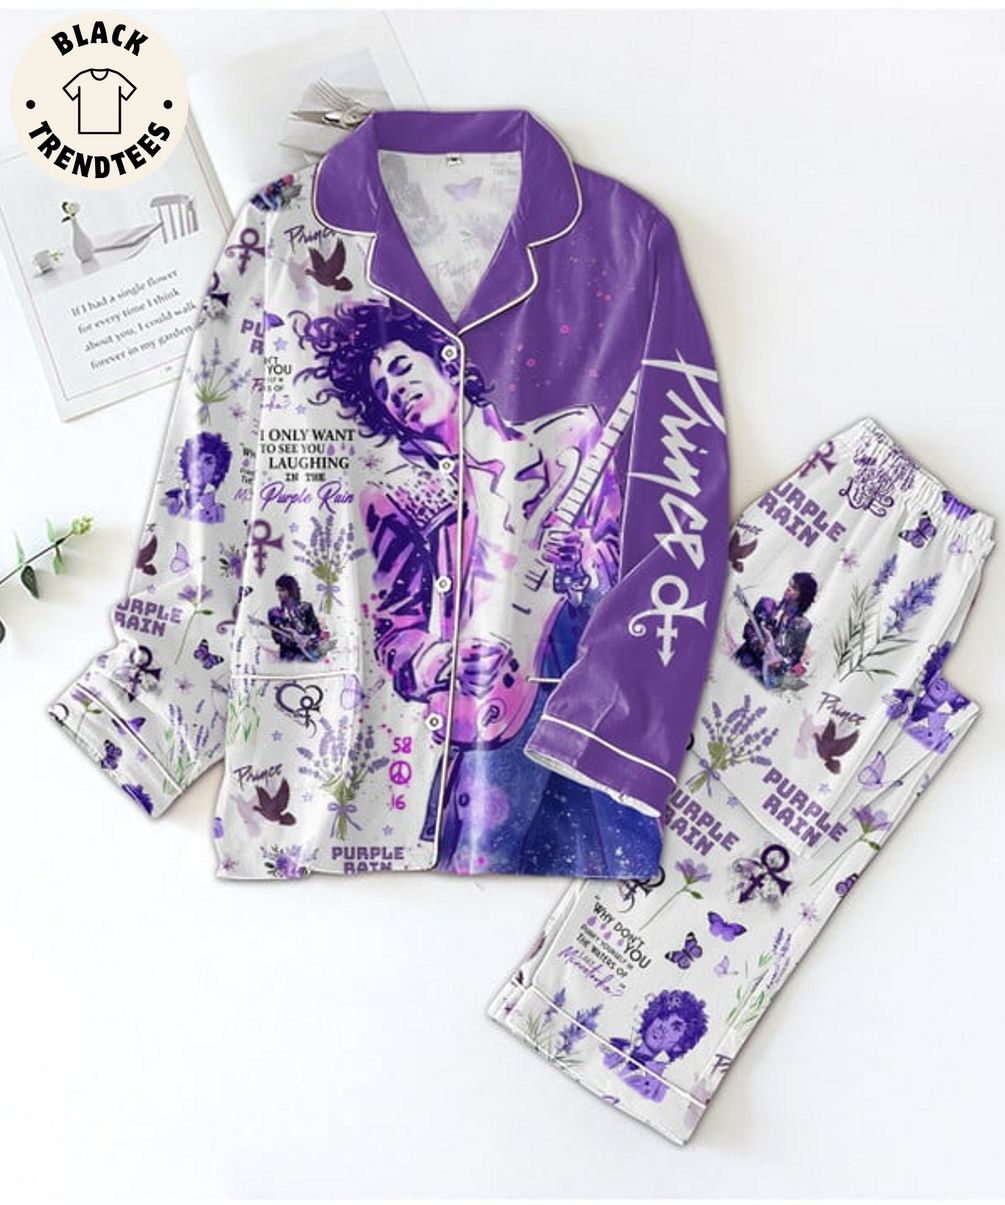 I Only Want To See You Laughing In The Purple Rain Pijamas Sets